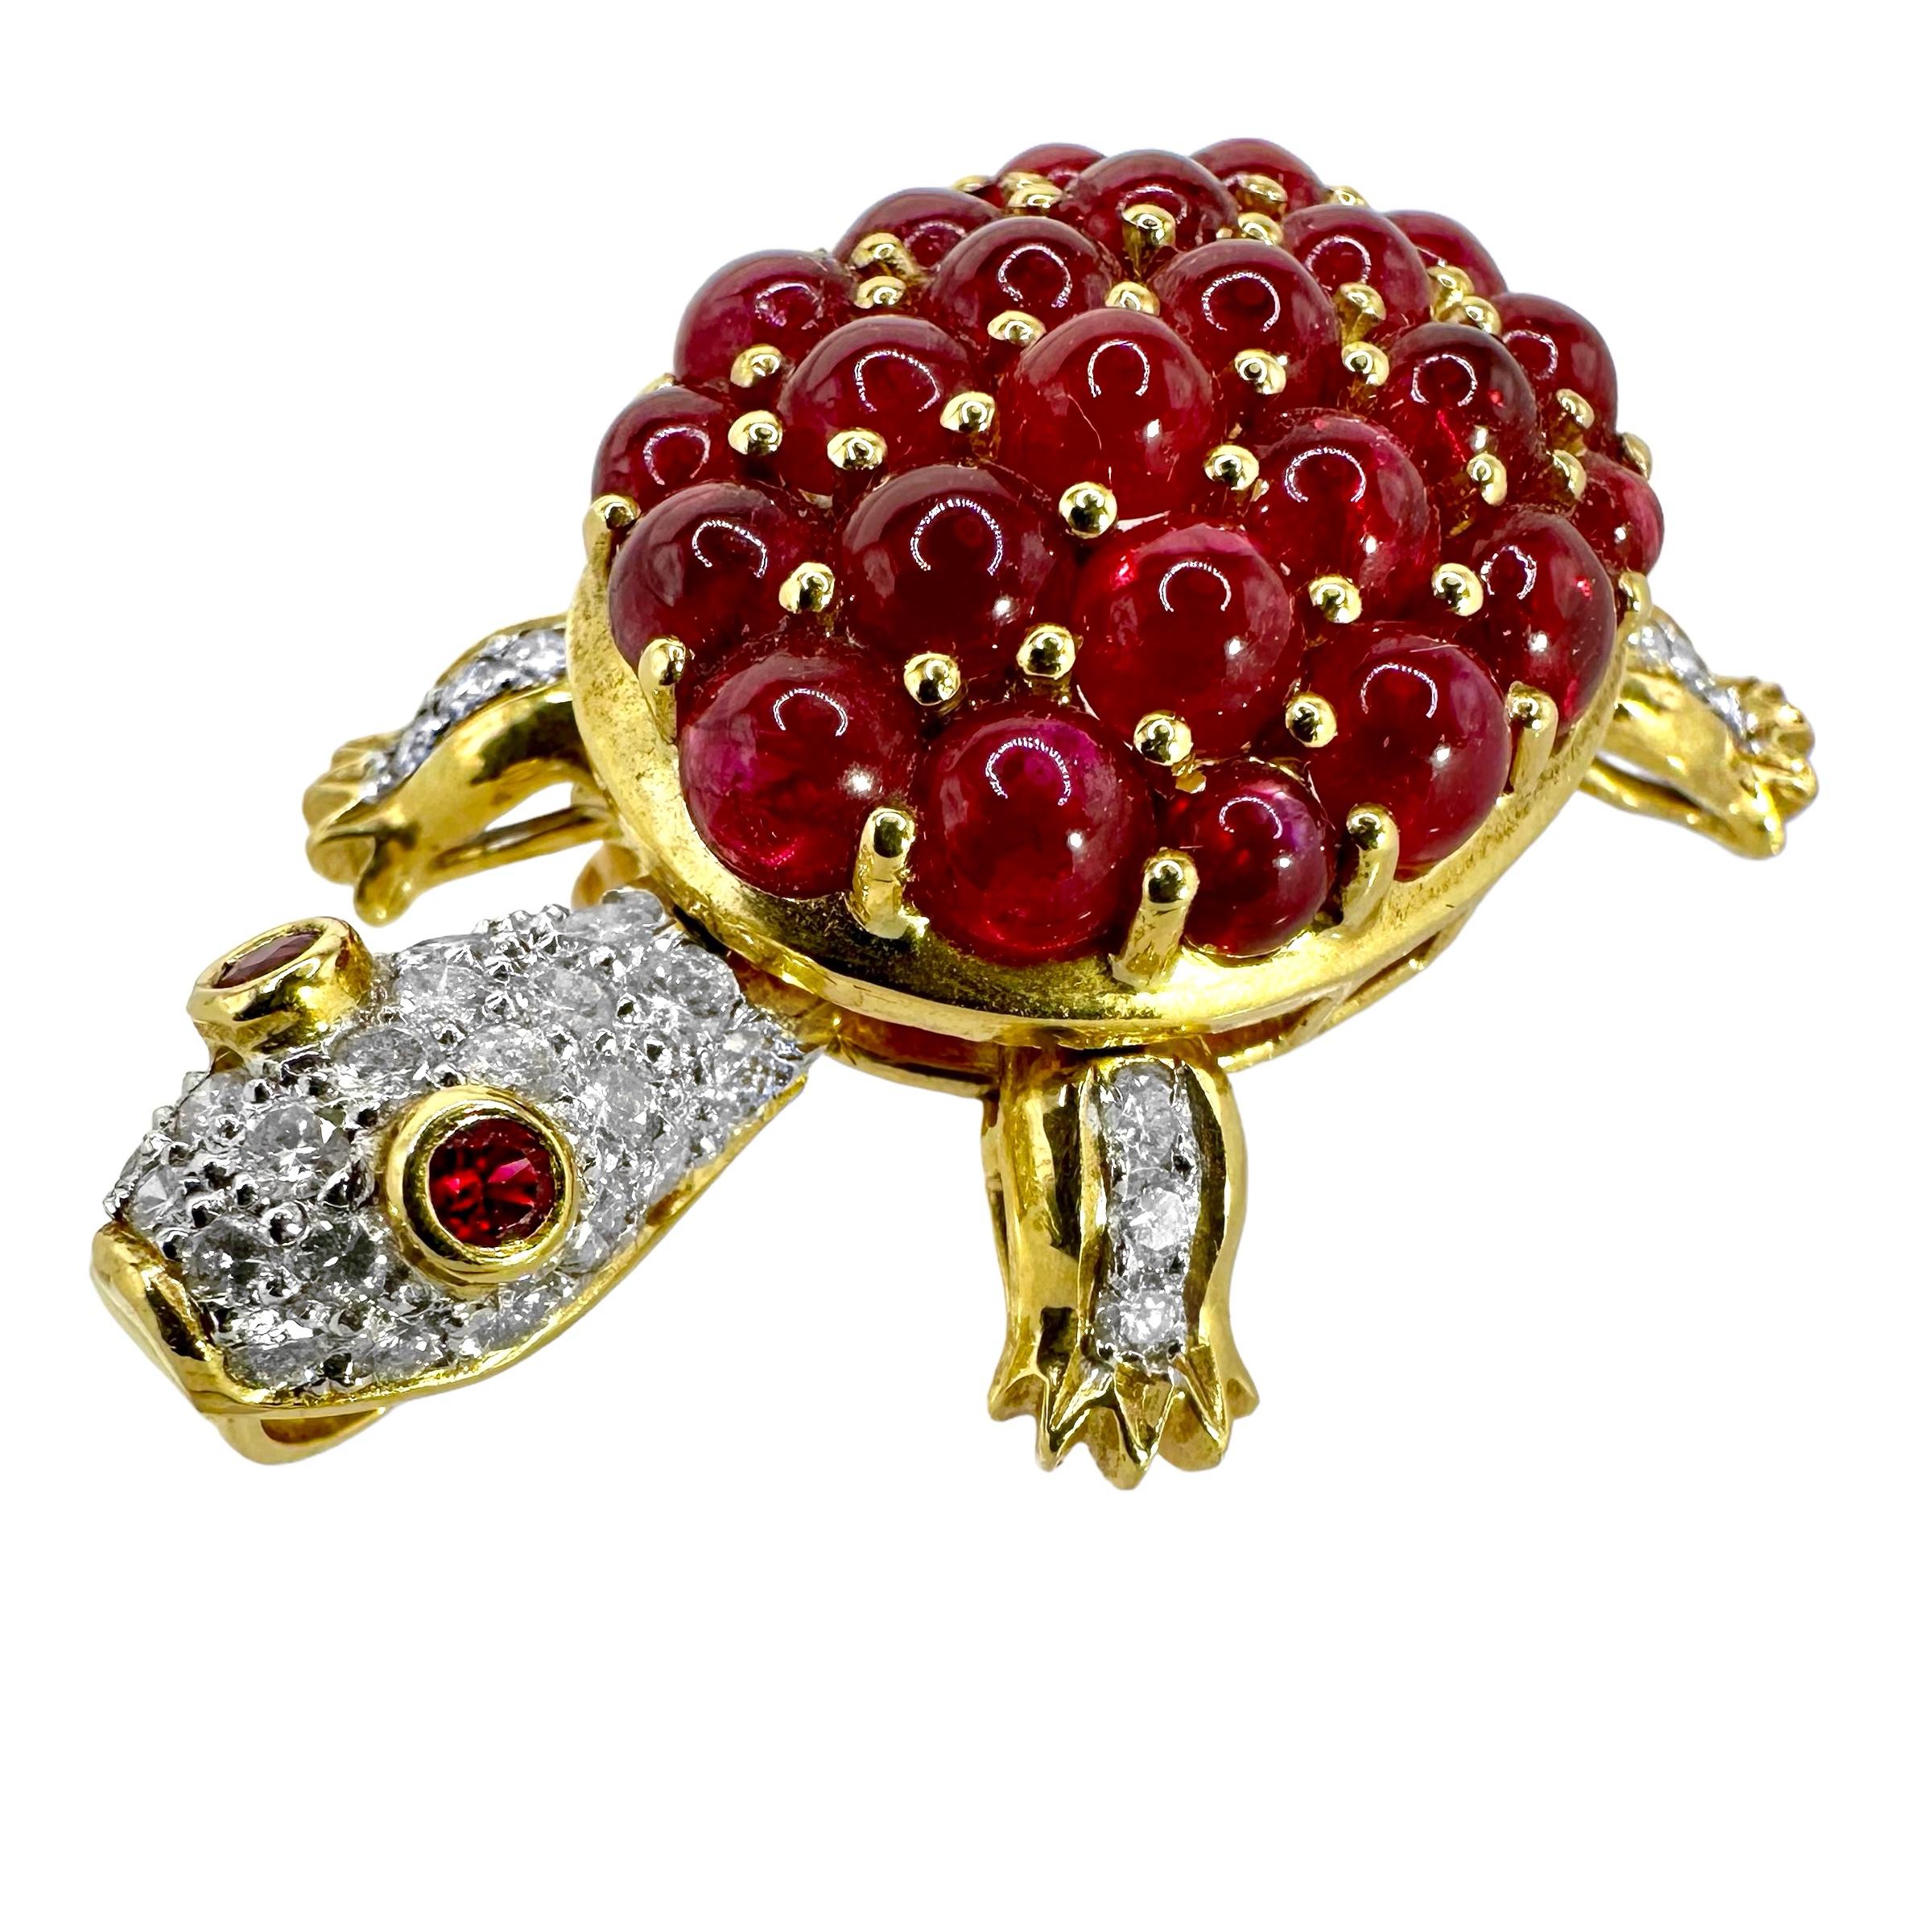 Adorable Turtle Brooch/Pendant with Motion in 18K Gold, Diamonds, and Rubies For Sale 2